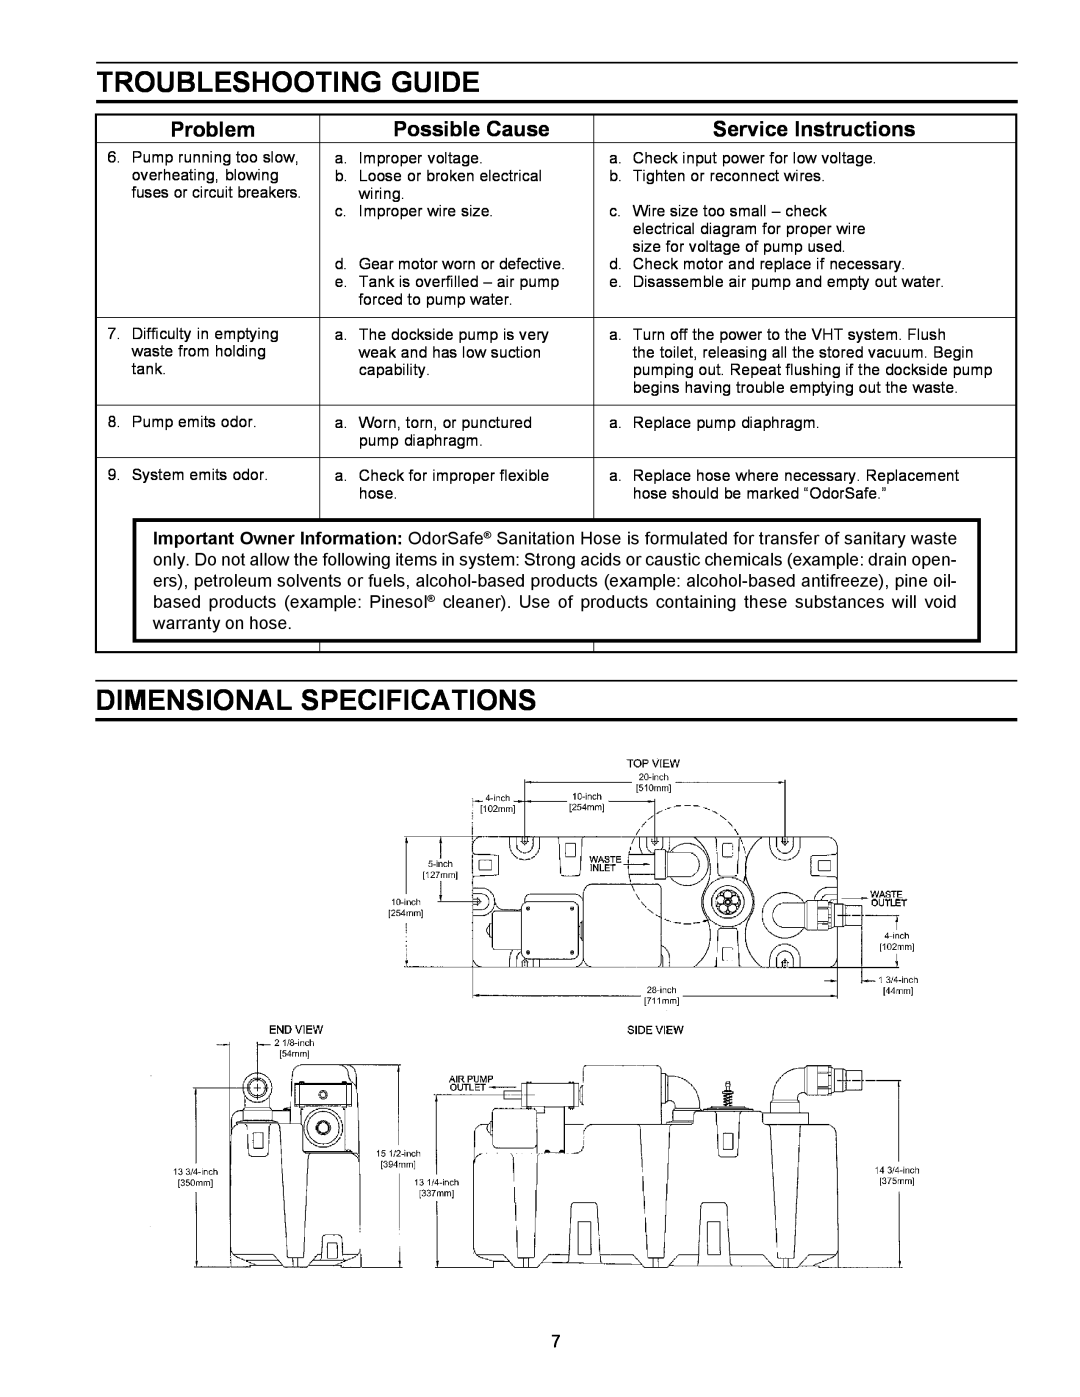 SeaLand VACUUM HOLDING TANK owner manual Dimensional Specifications, Troubleshooting Guide, Problem, Possible Cause 